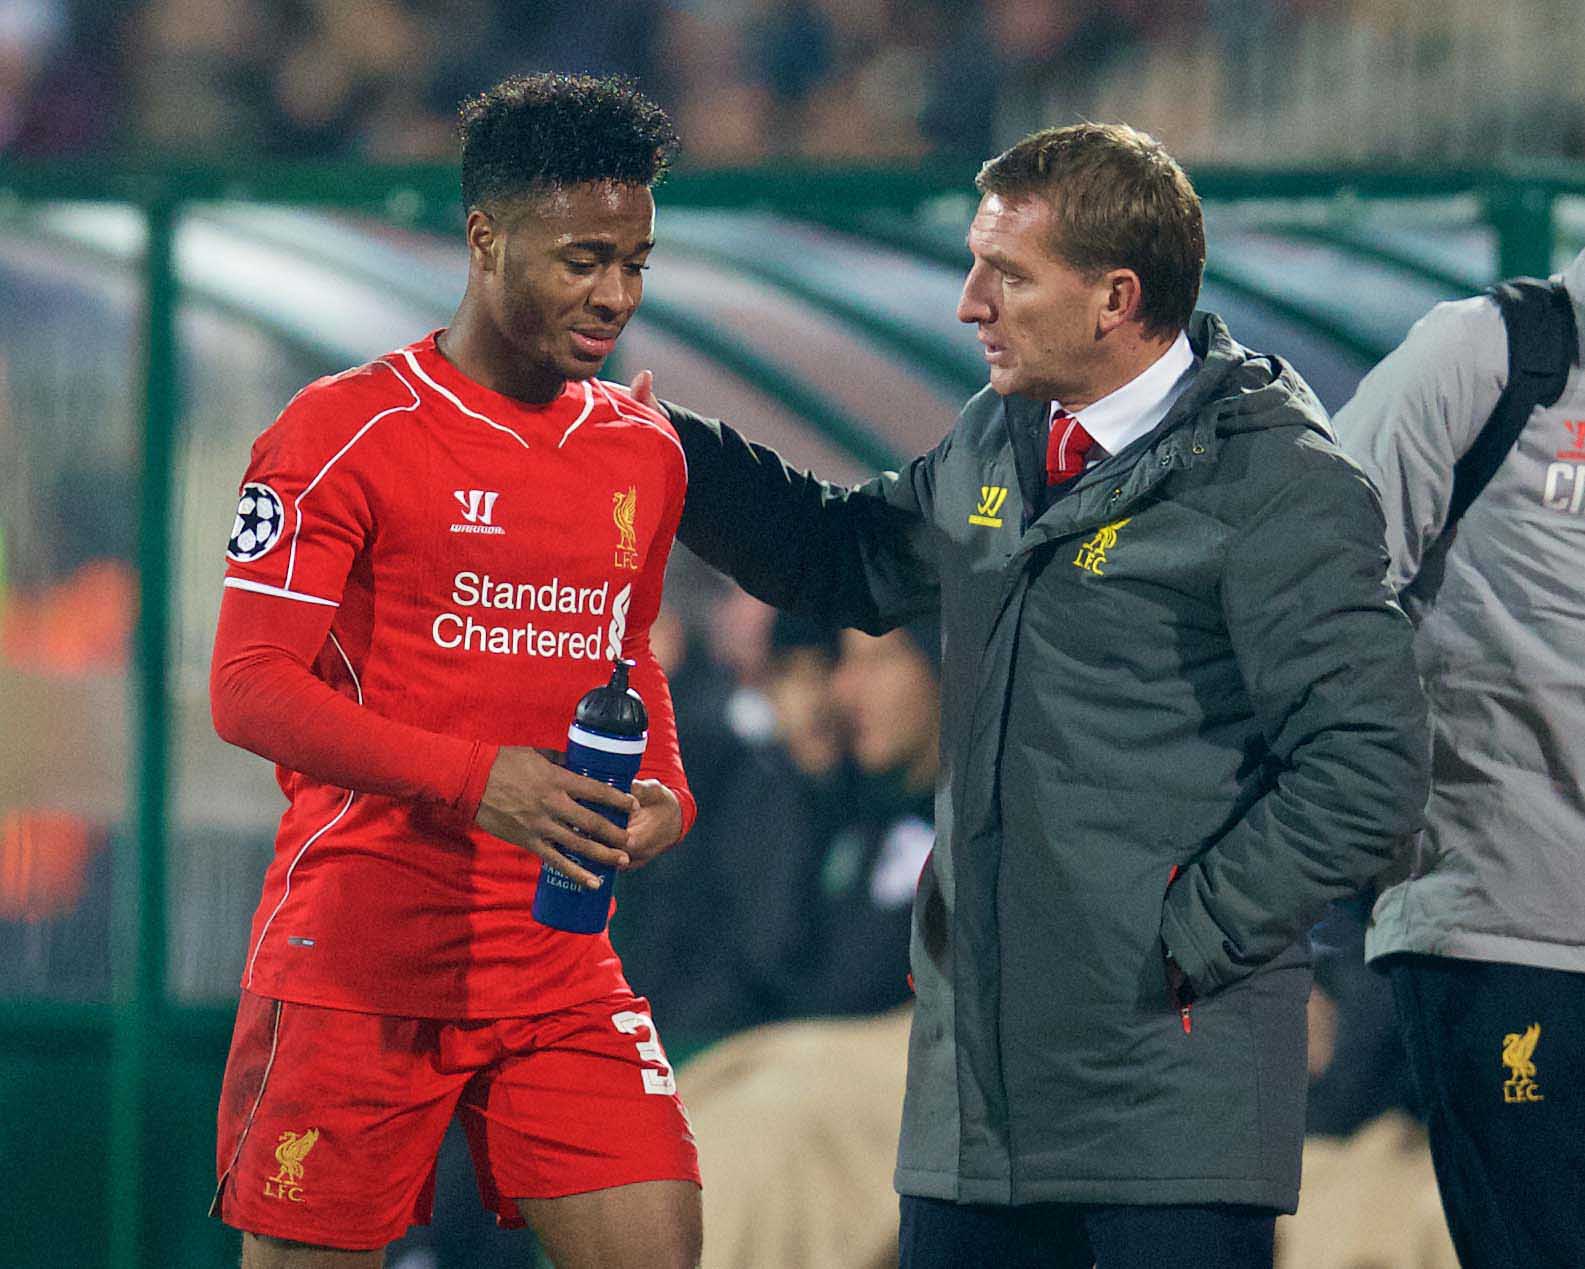 Brendan Rodgers sees bright Liverpool future for Jordon Ibe - Liverpool FC  - This Is Anfield